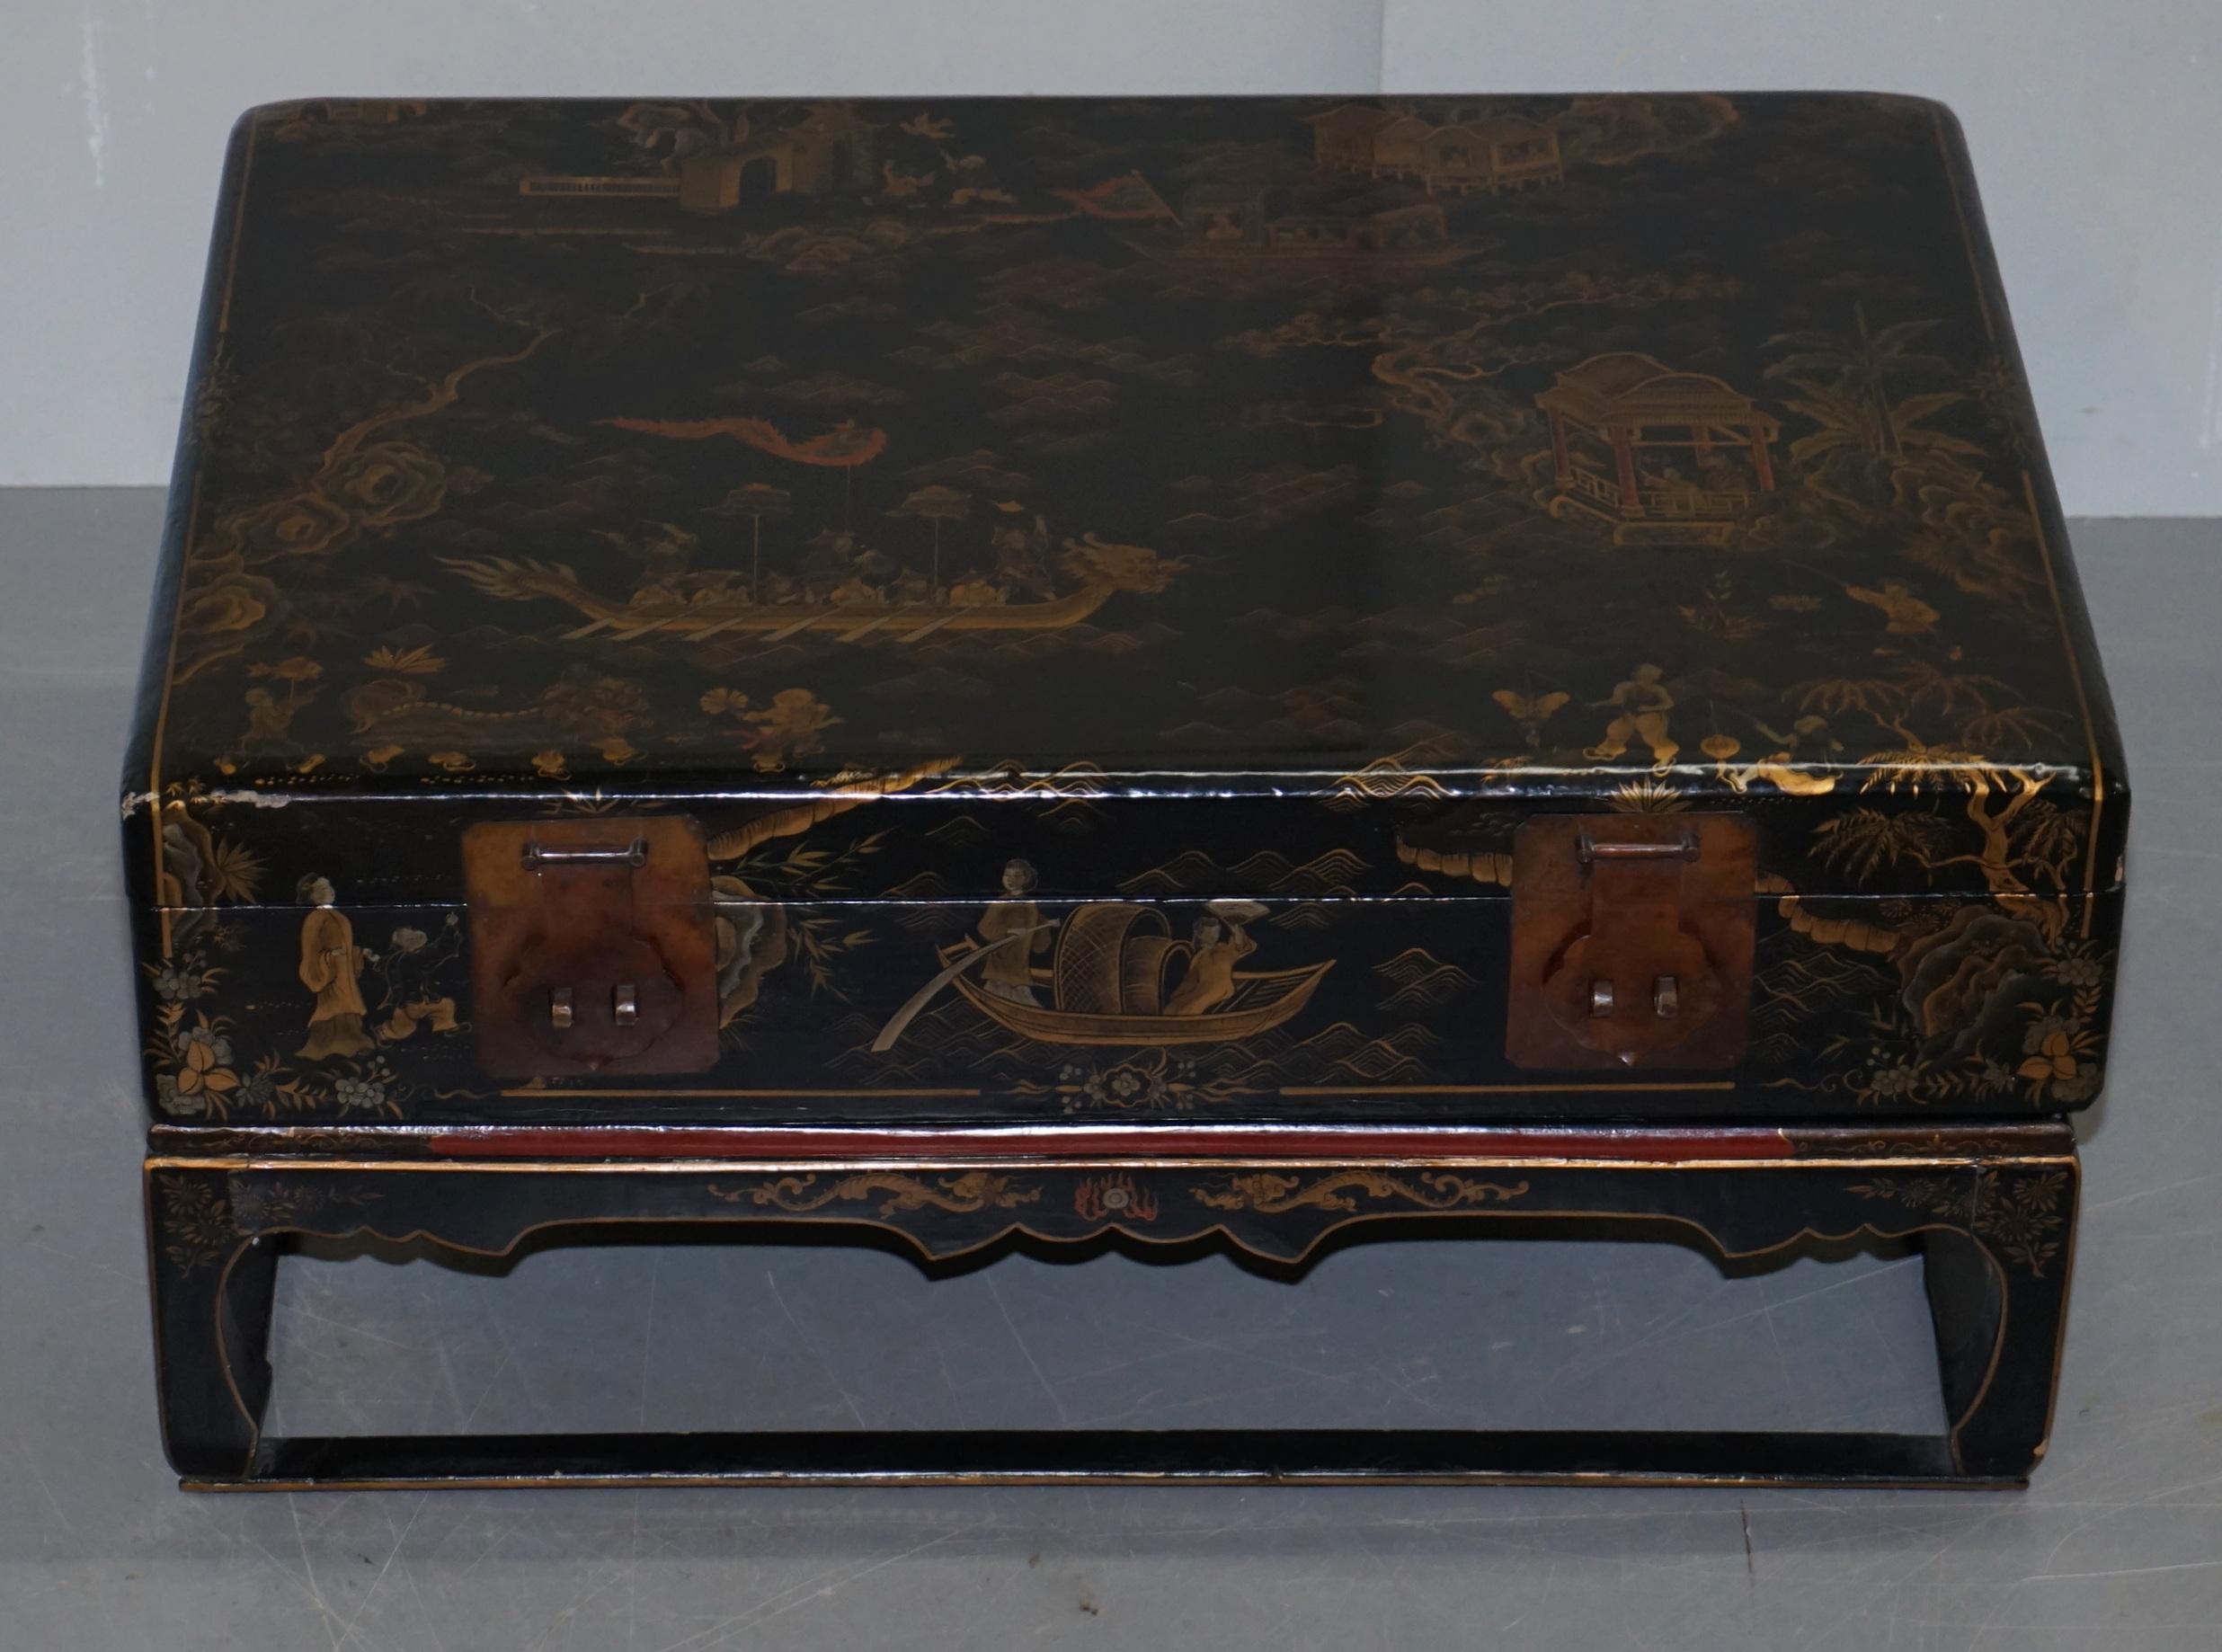 We are delighted to offer for sale this lovely vintage circa 1930s Chinese chinoiserie luggage chest coffee table

A good looking and decorative piece, the finish is sublime, this is art furniture from every angle. It’s based on a piece of luggage